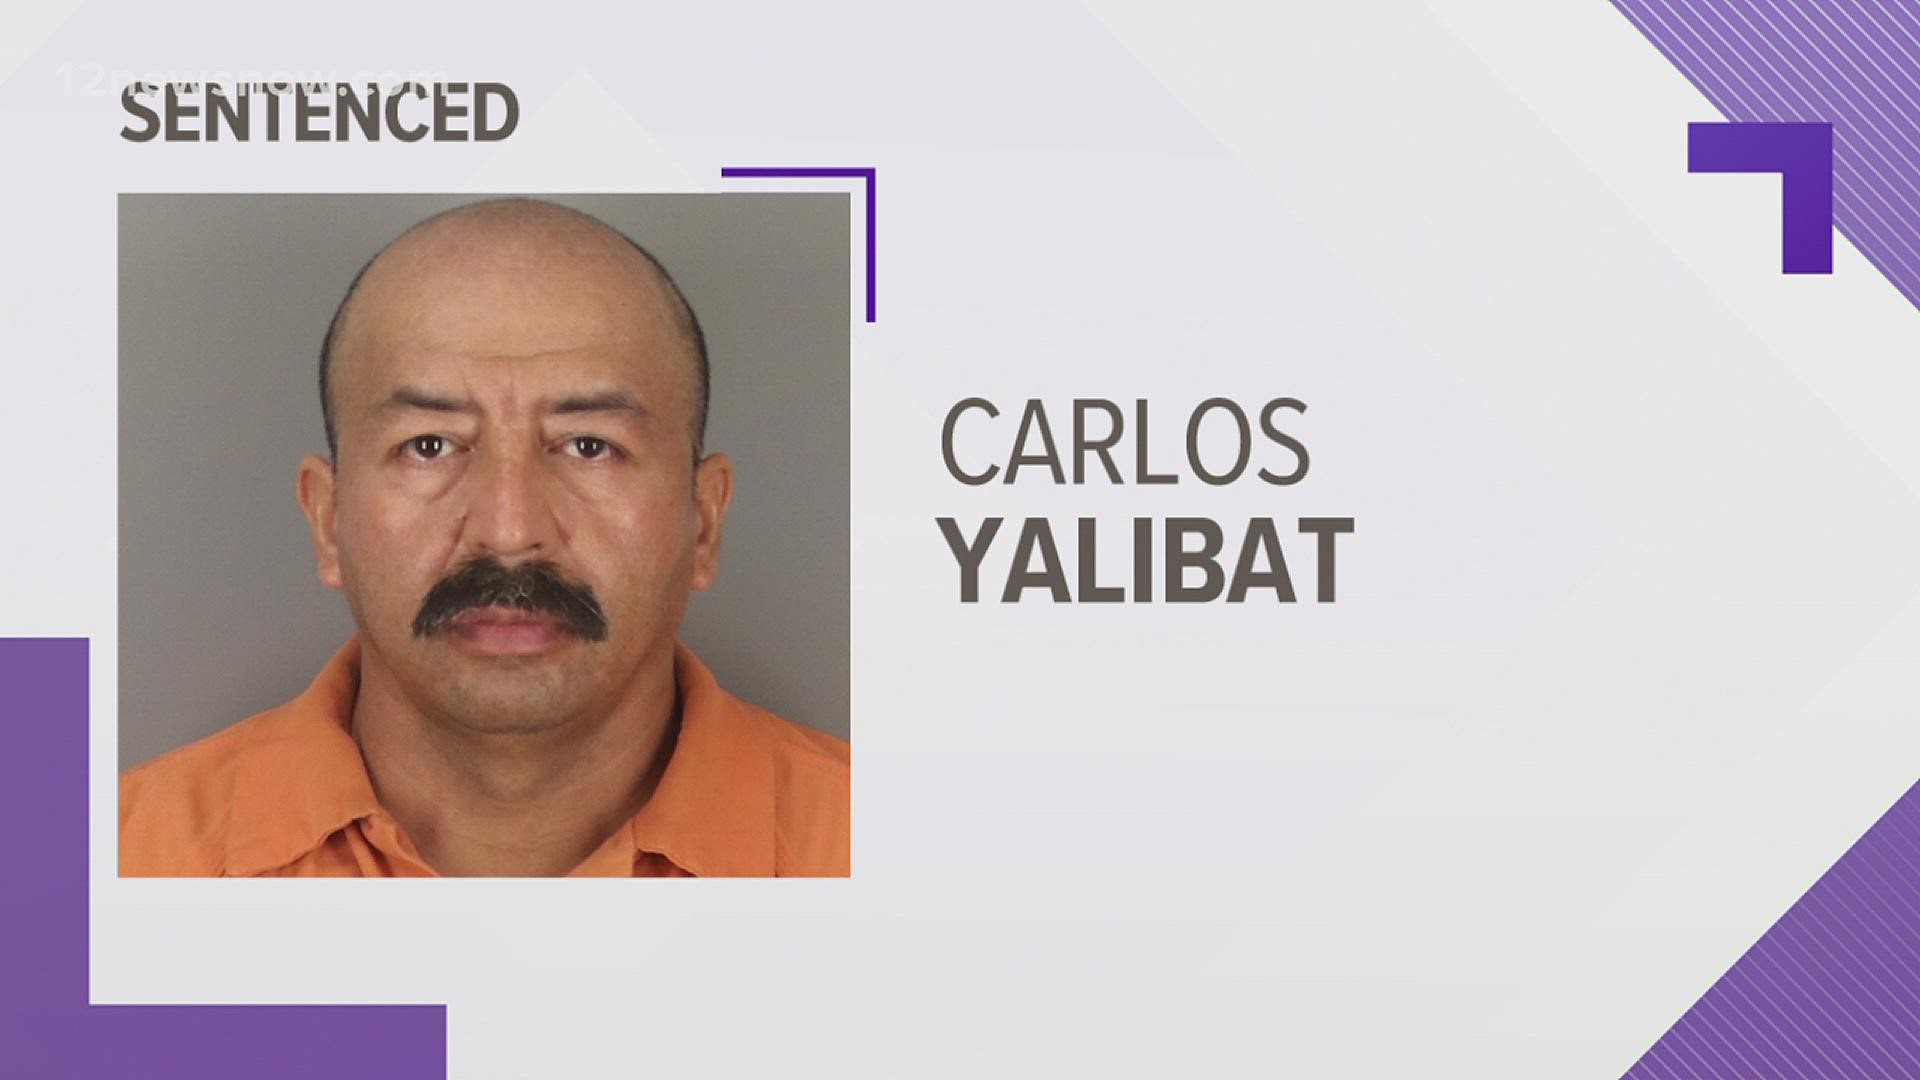 The Beaumont Police Department started an investigation into Yalibat in May 2019 after receiving a phone call from a 19-year-old woman.